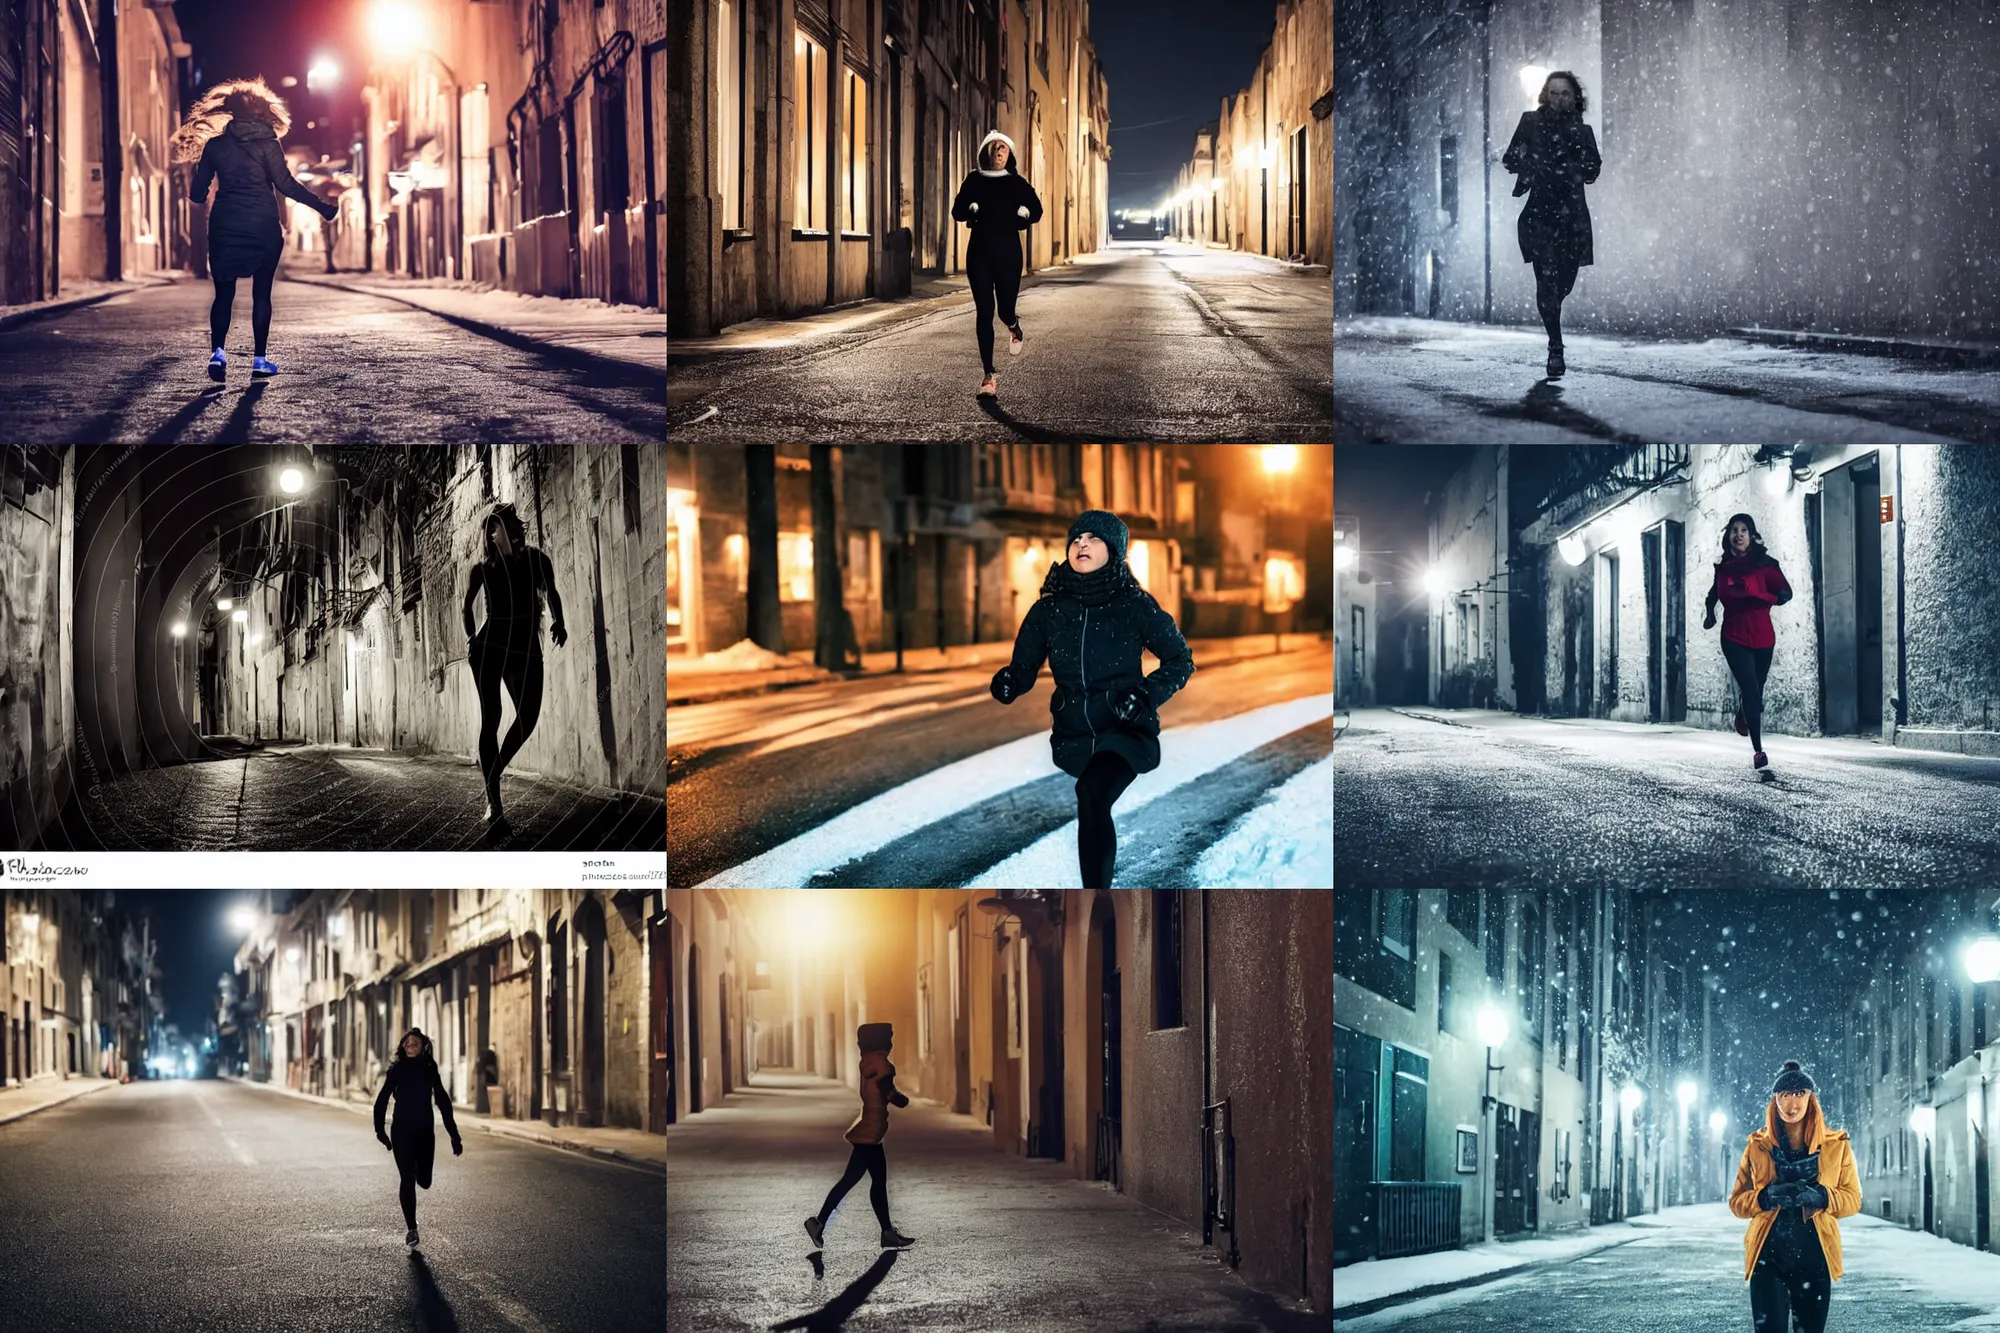 Prompt: woman 3 6 years old in one sheet runs along a dark street in winter